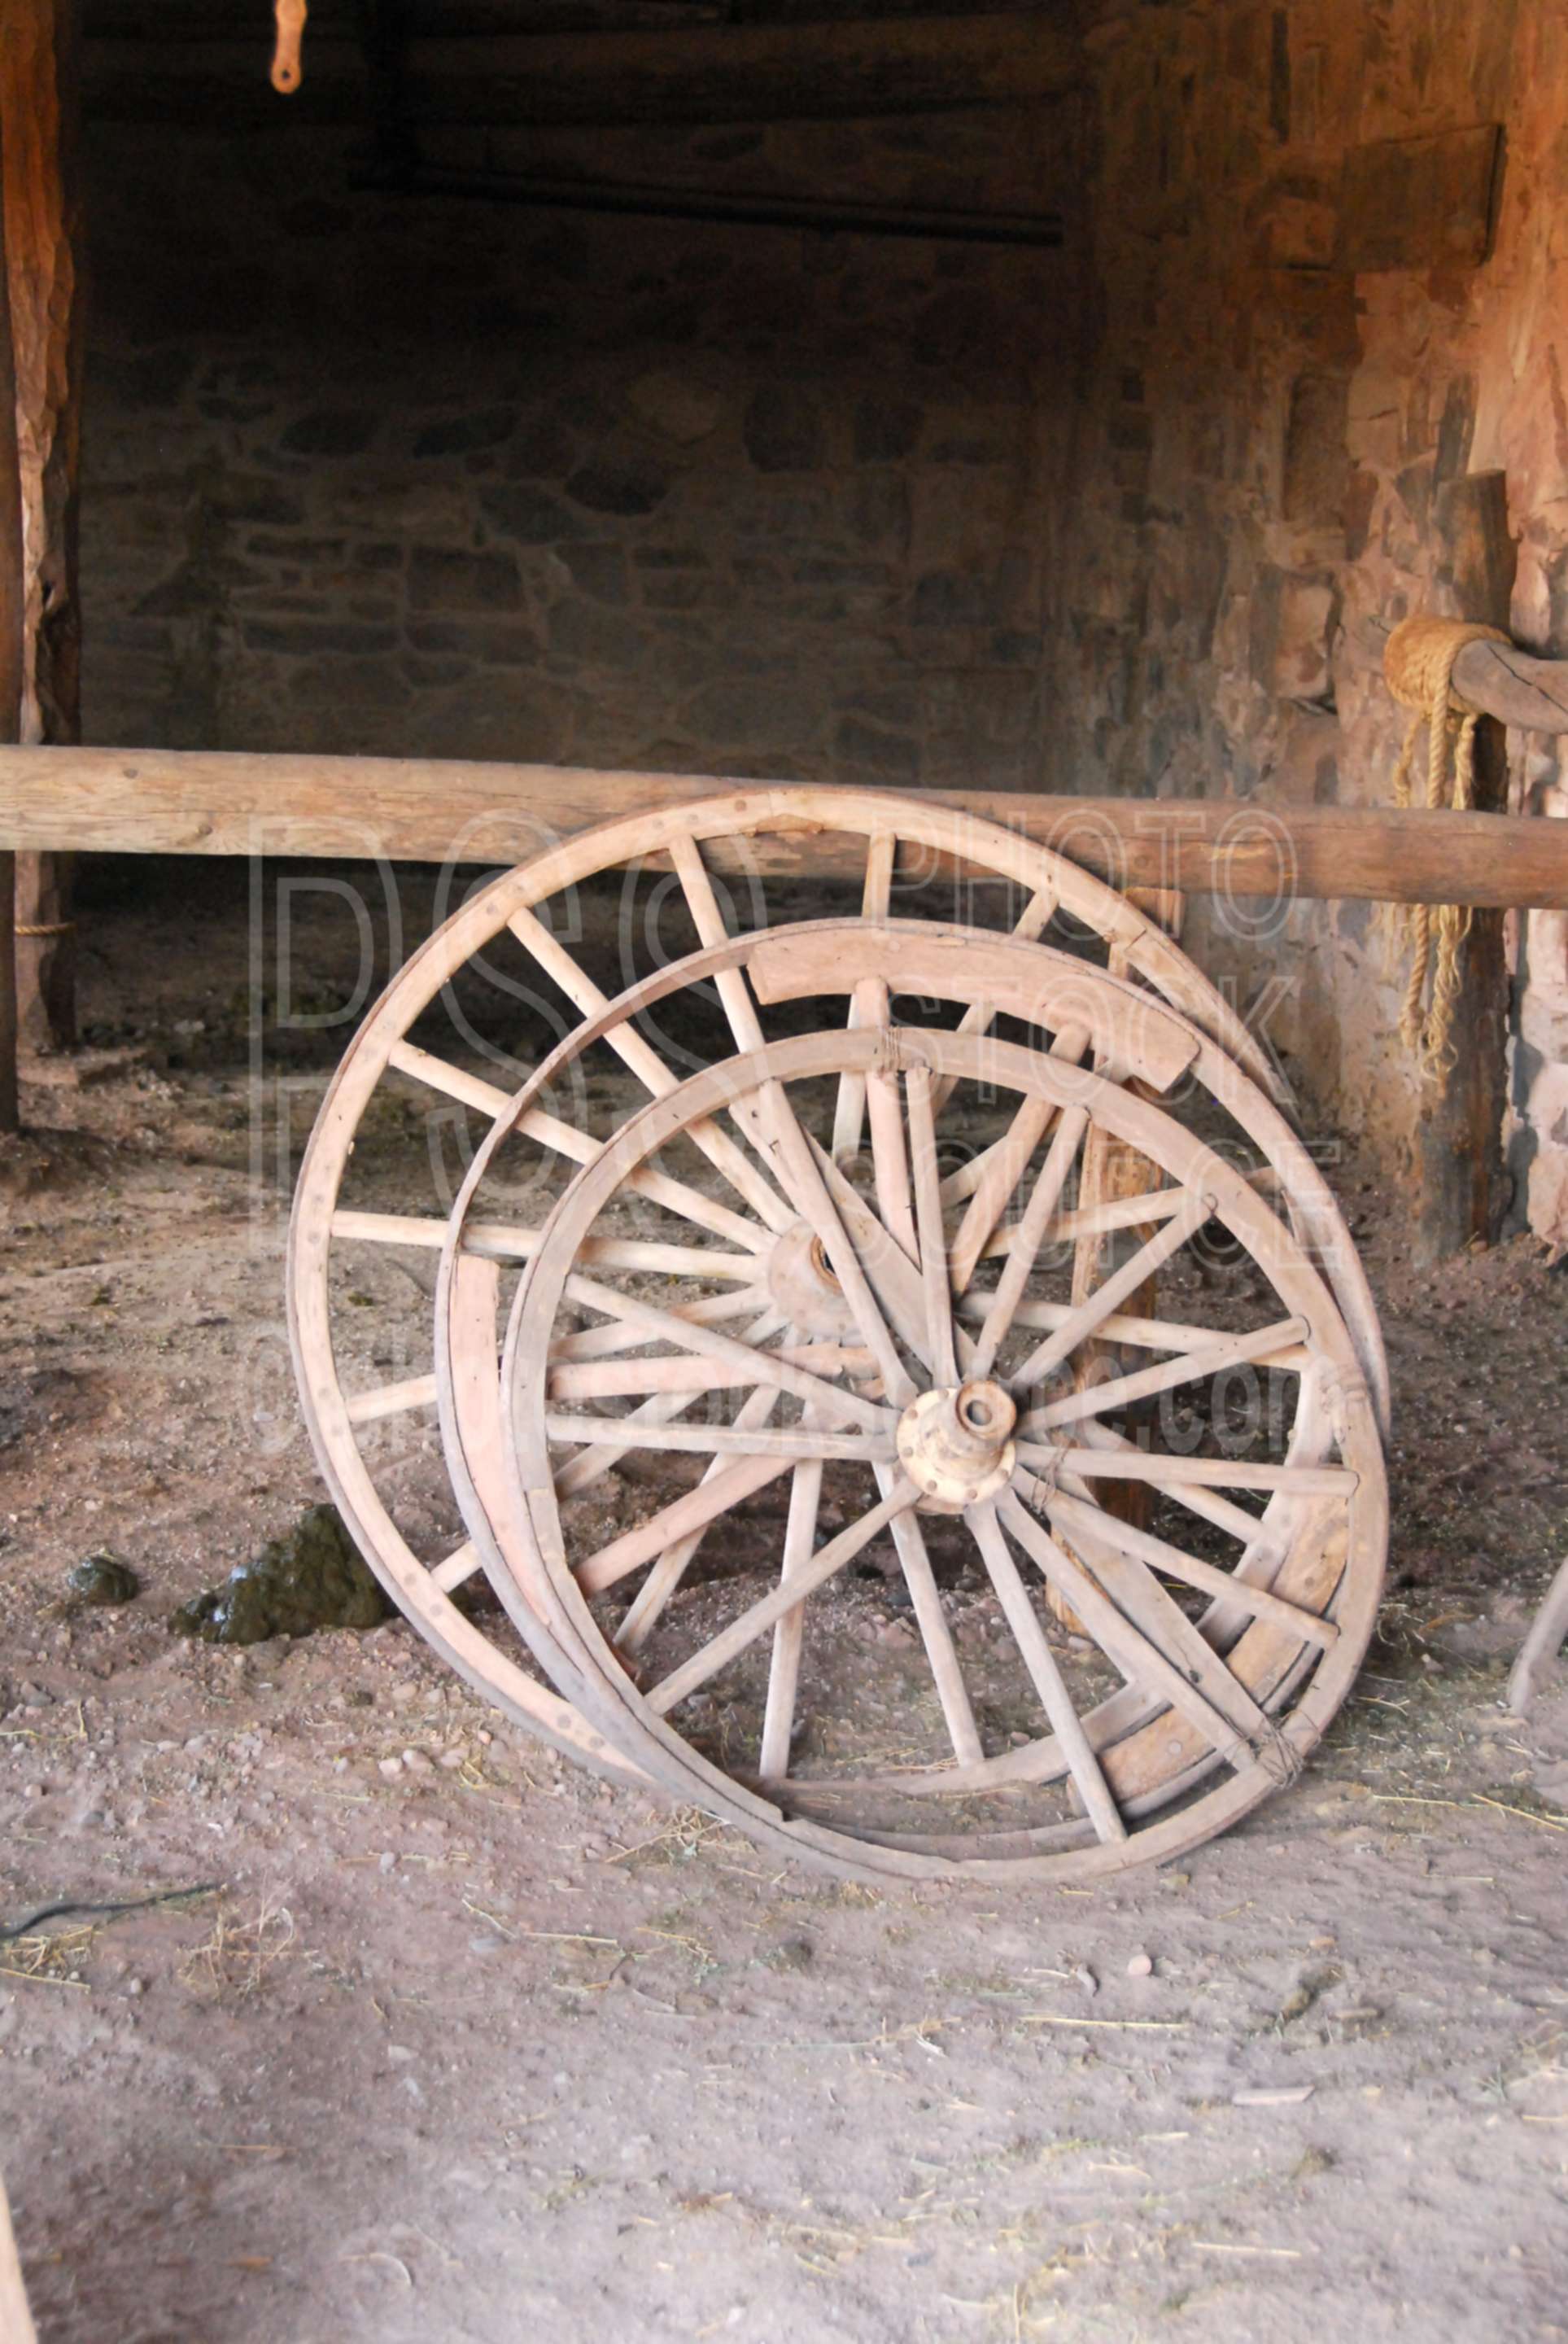 Wagon Wheels,trading post,hubbell trading post,historical,wheels